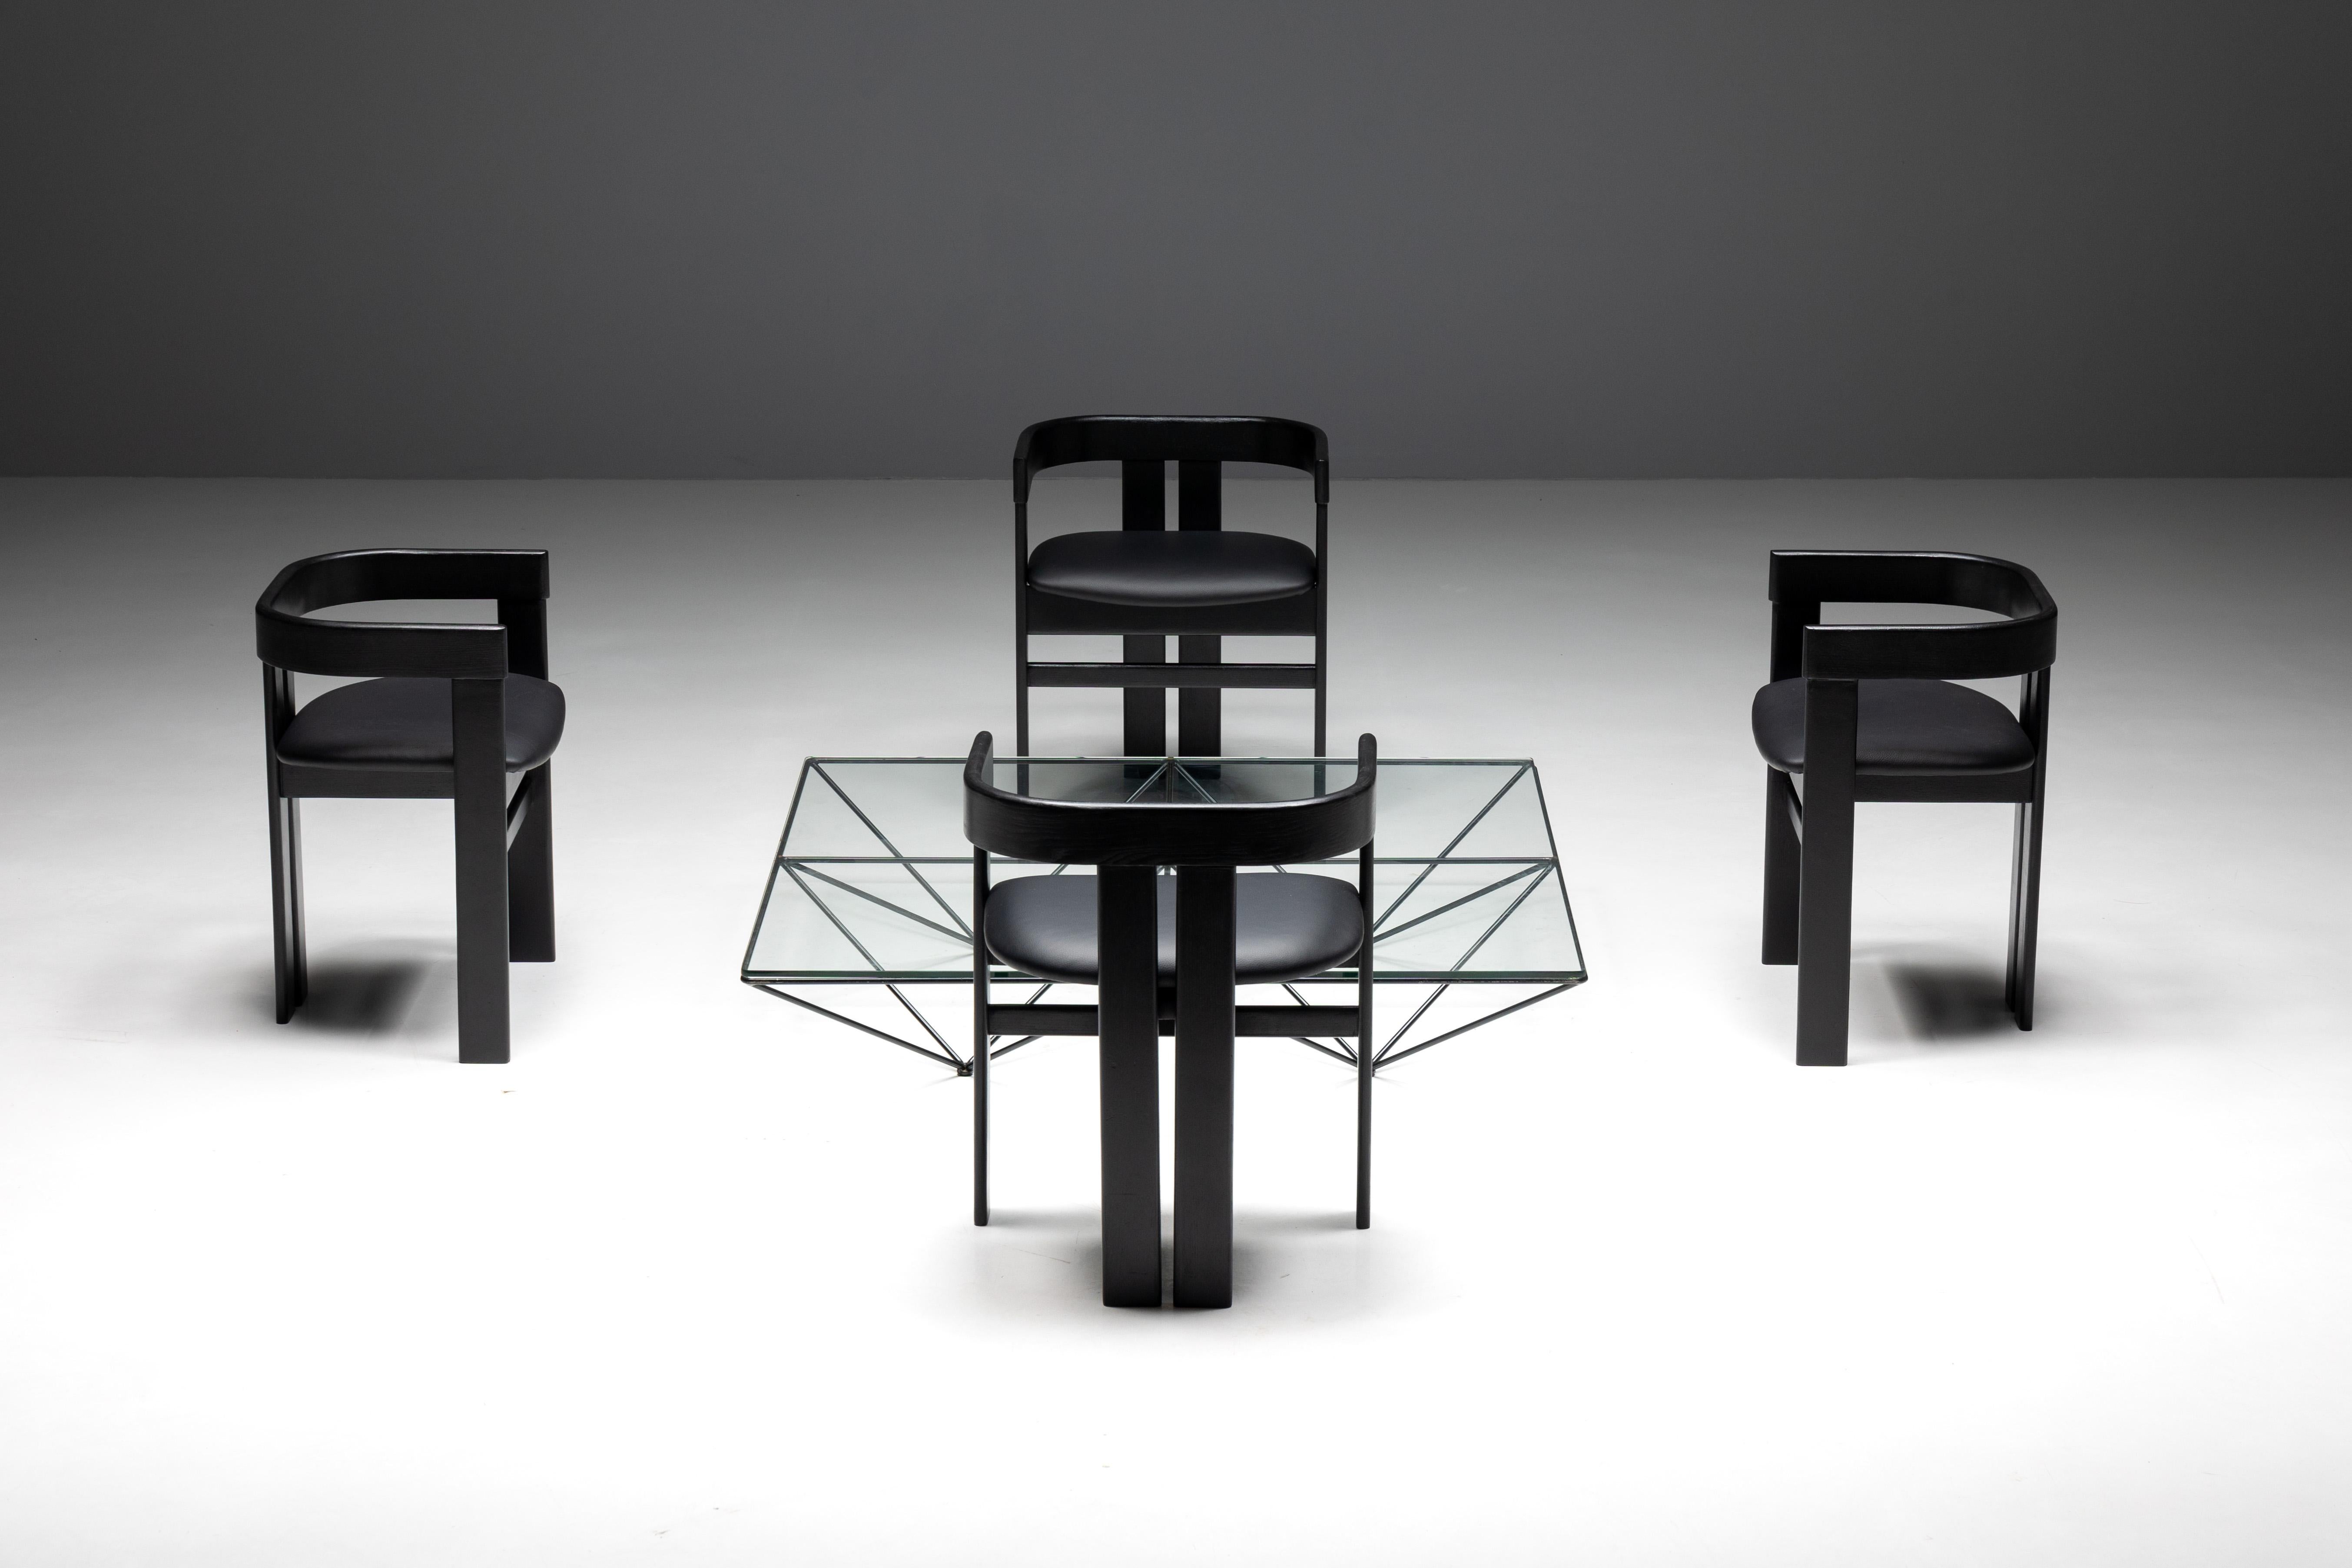 Pigreco Chairs by Tobia Scarpa for Tacchini, Italy, 1960s For Sale 7